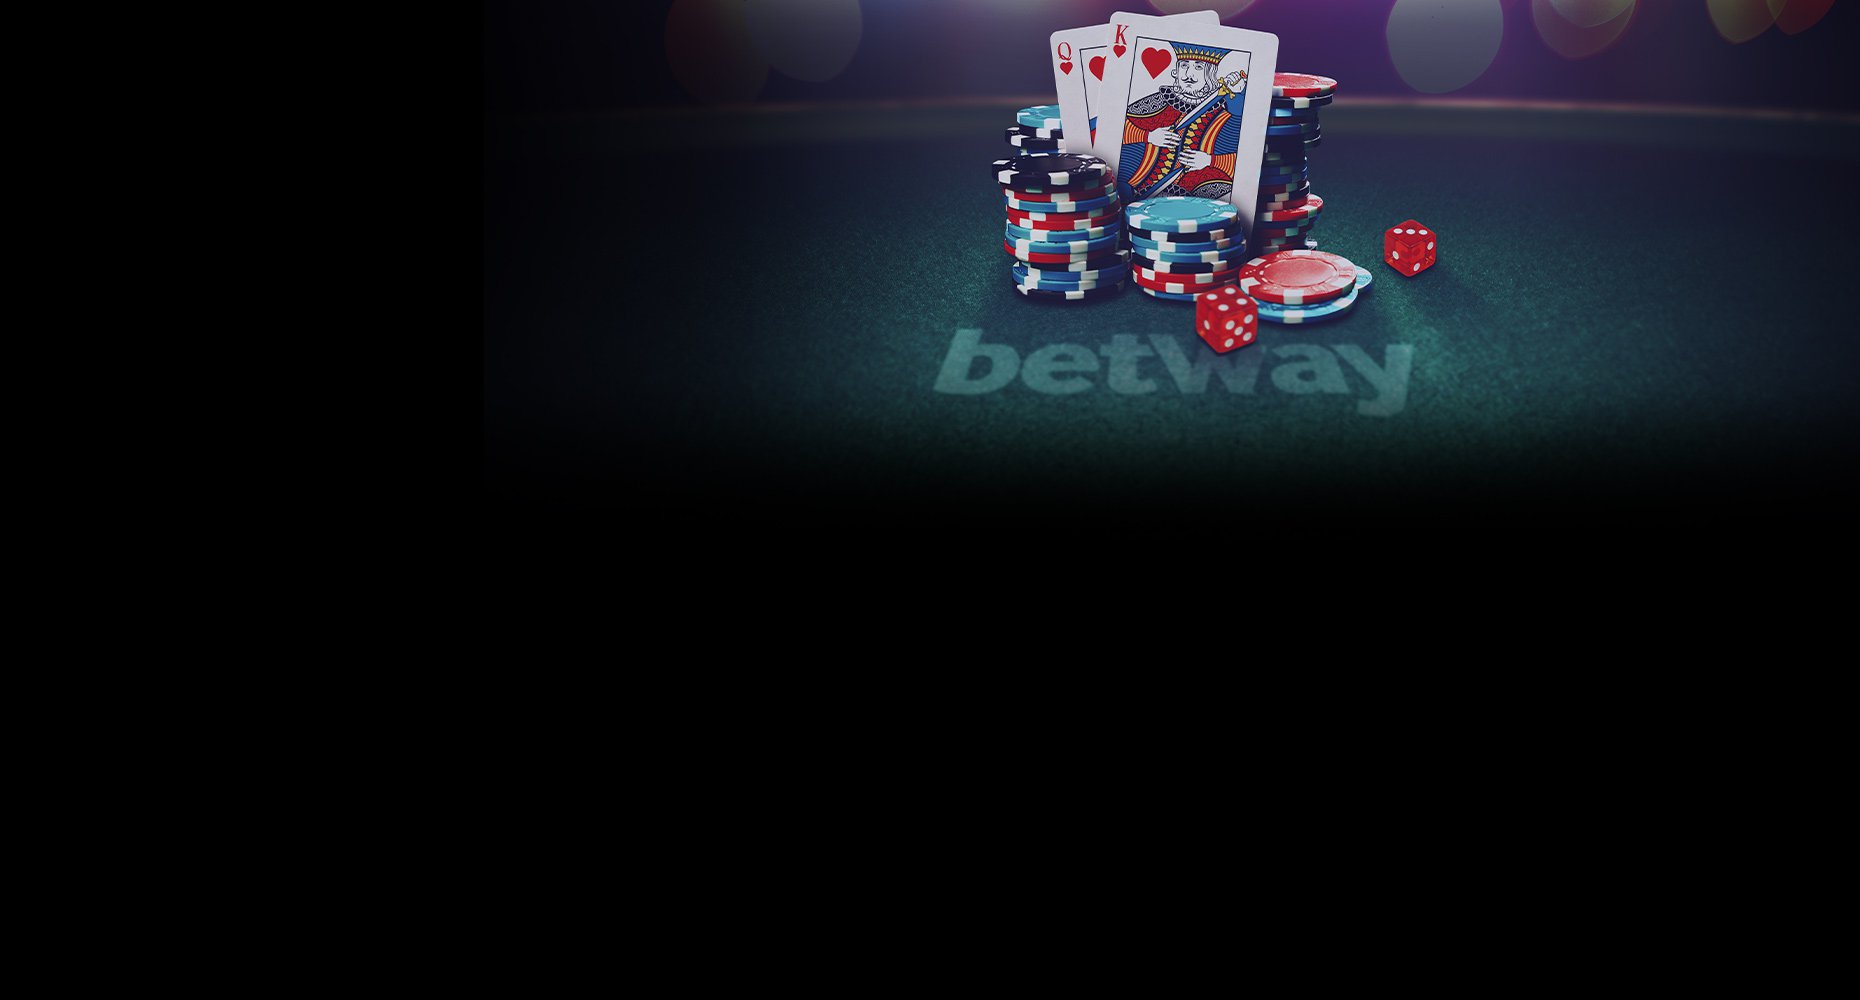 Pearl beauty: hold and win slot online cassino gratis